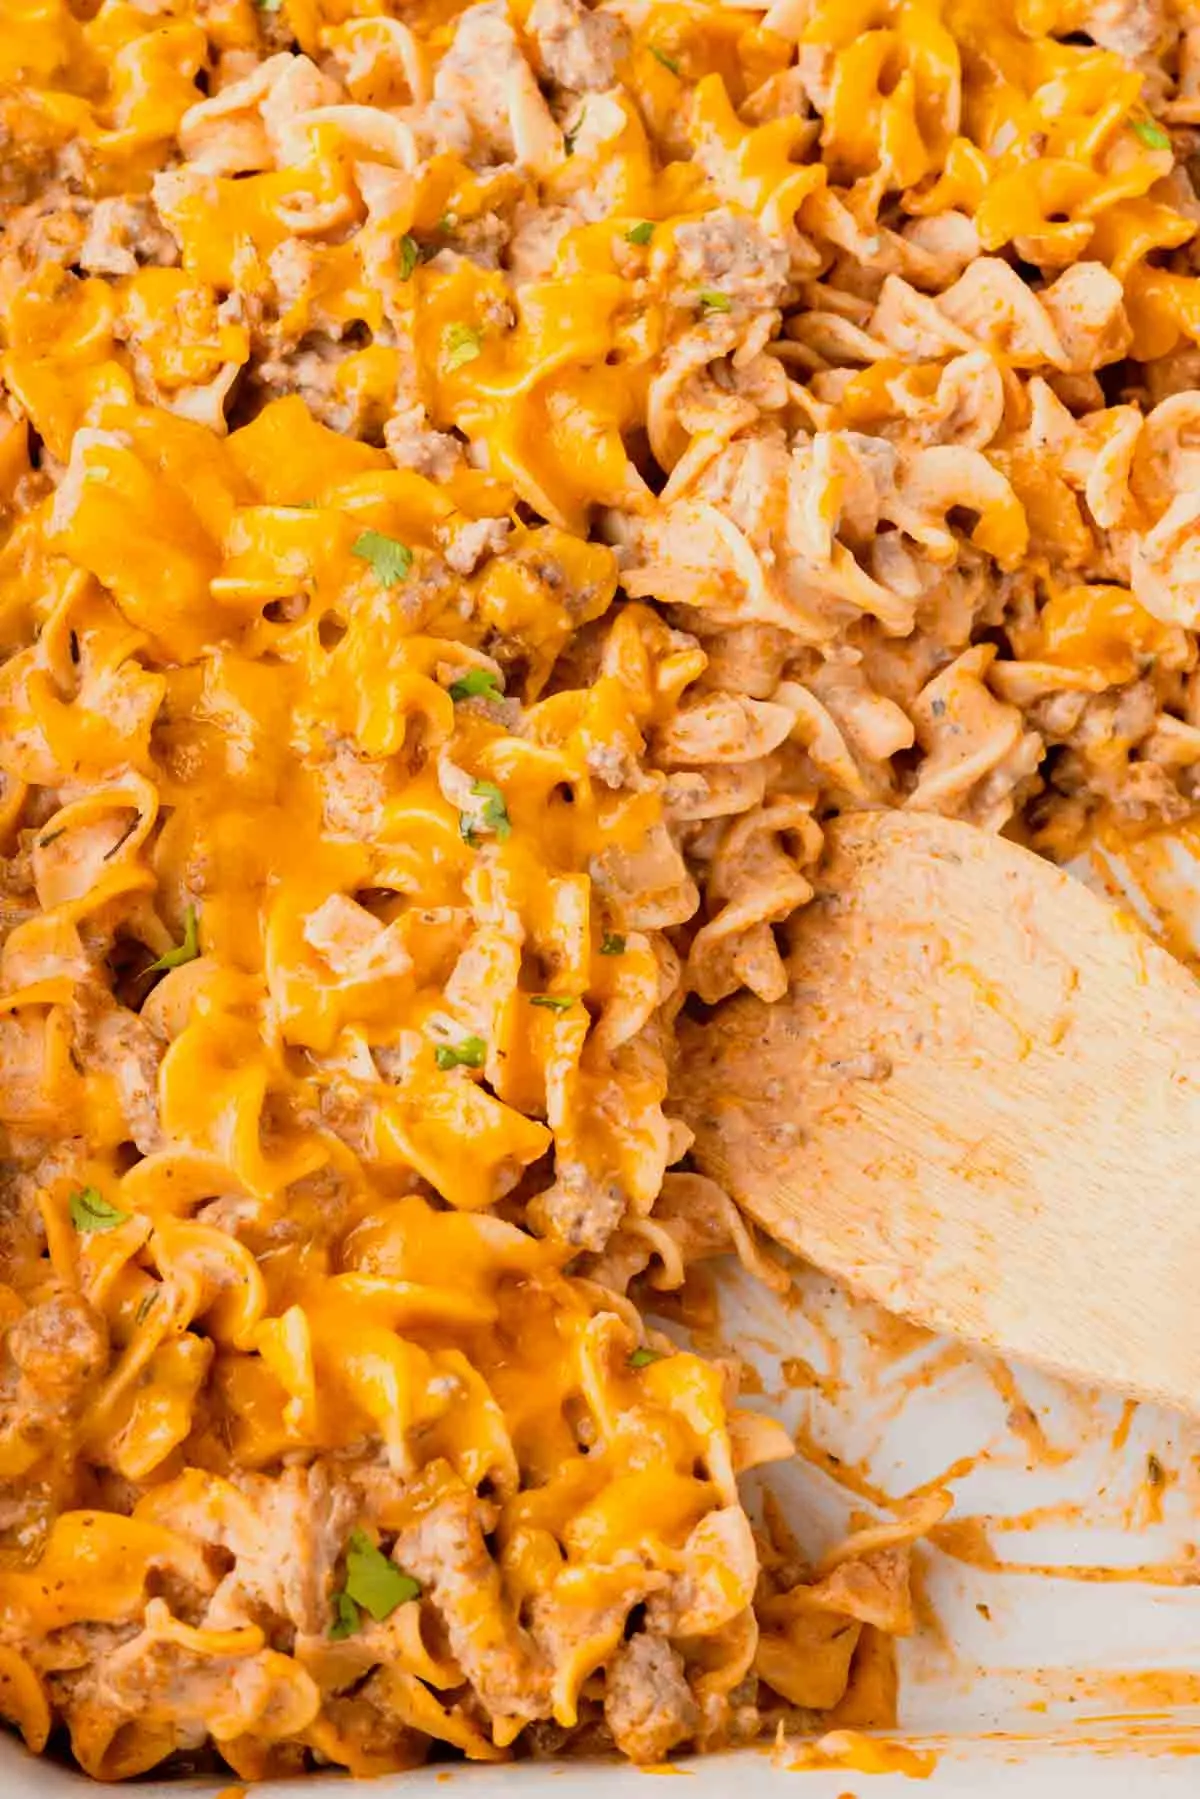 Beef Noodle Casserole is a hearty dish loaded with ground beef, egg noodles, cheddar cheese, sour cream and cream of mushroom soup.